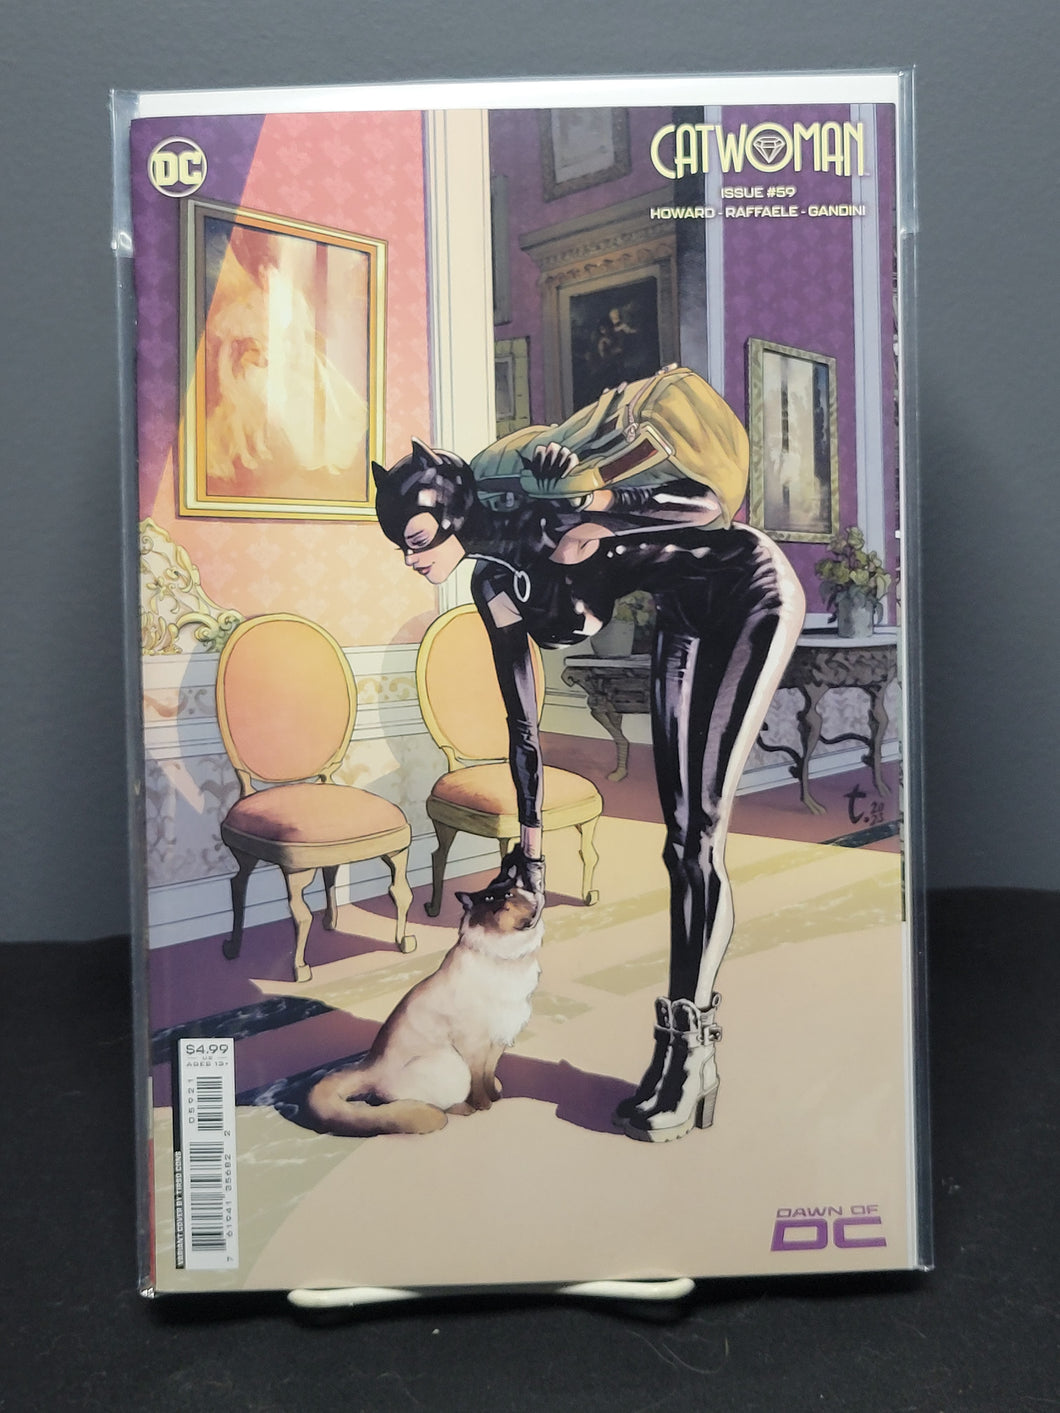 Catwoman #59 Cons Variant